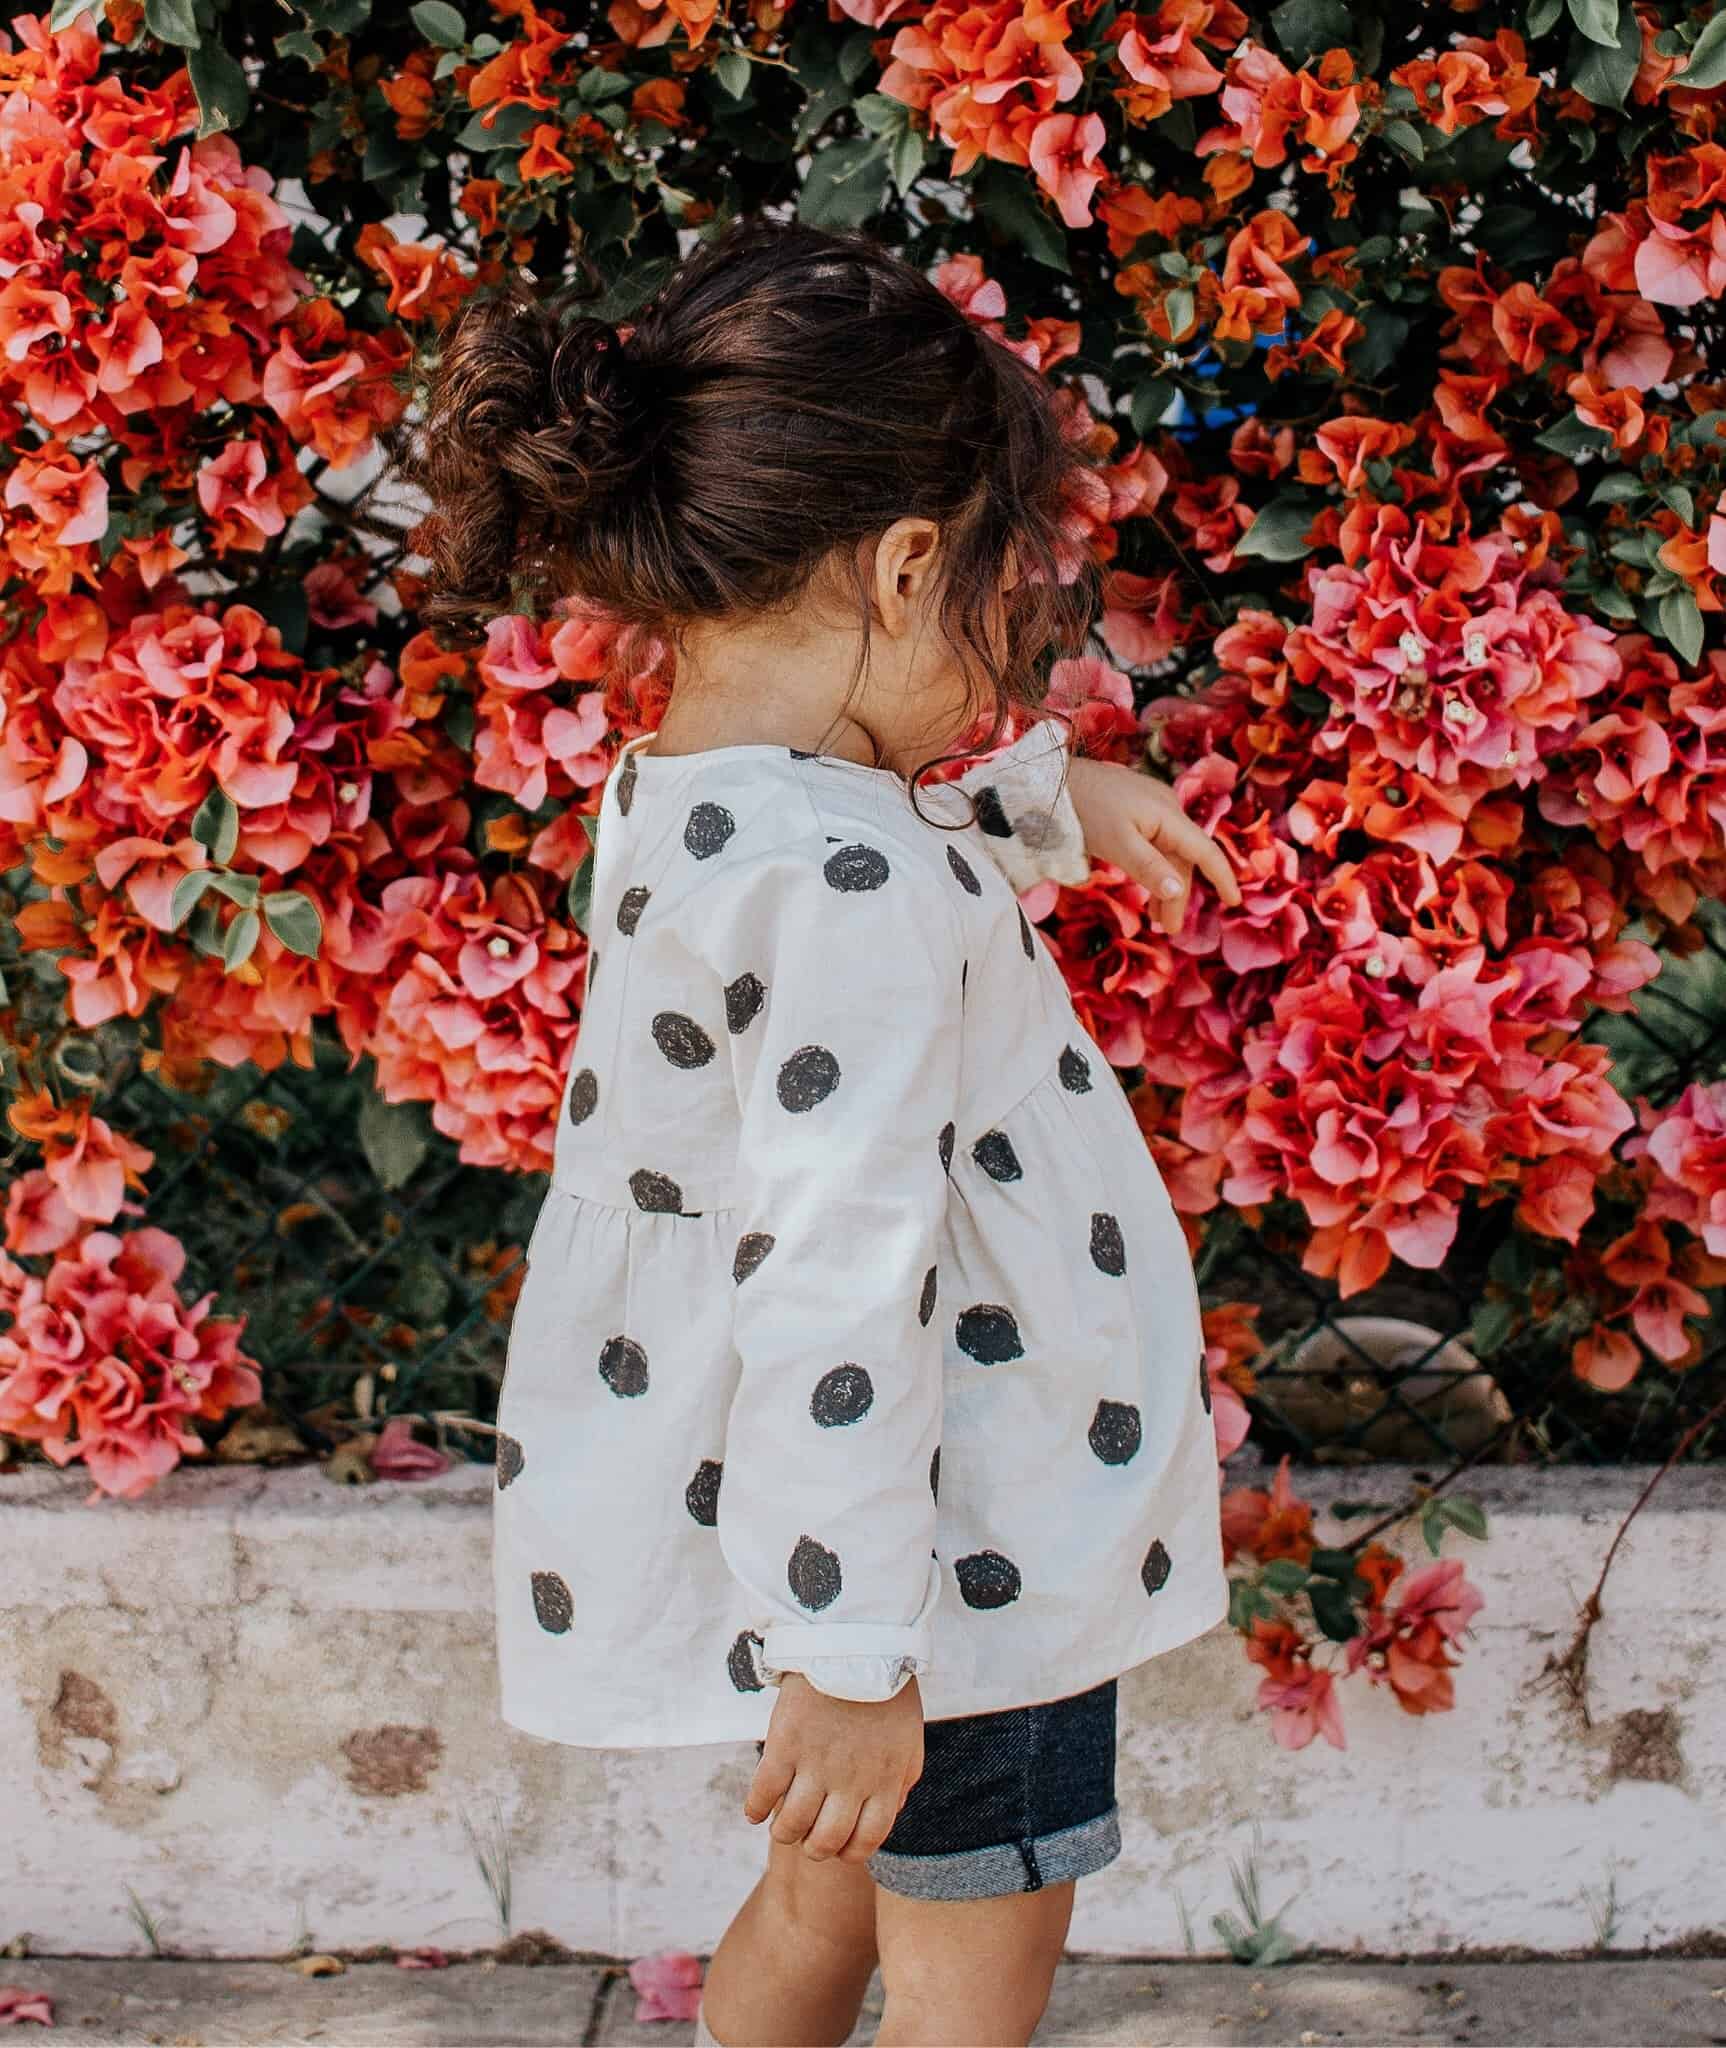 What’s Trending in Kids’ Clothing?